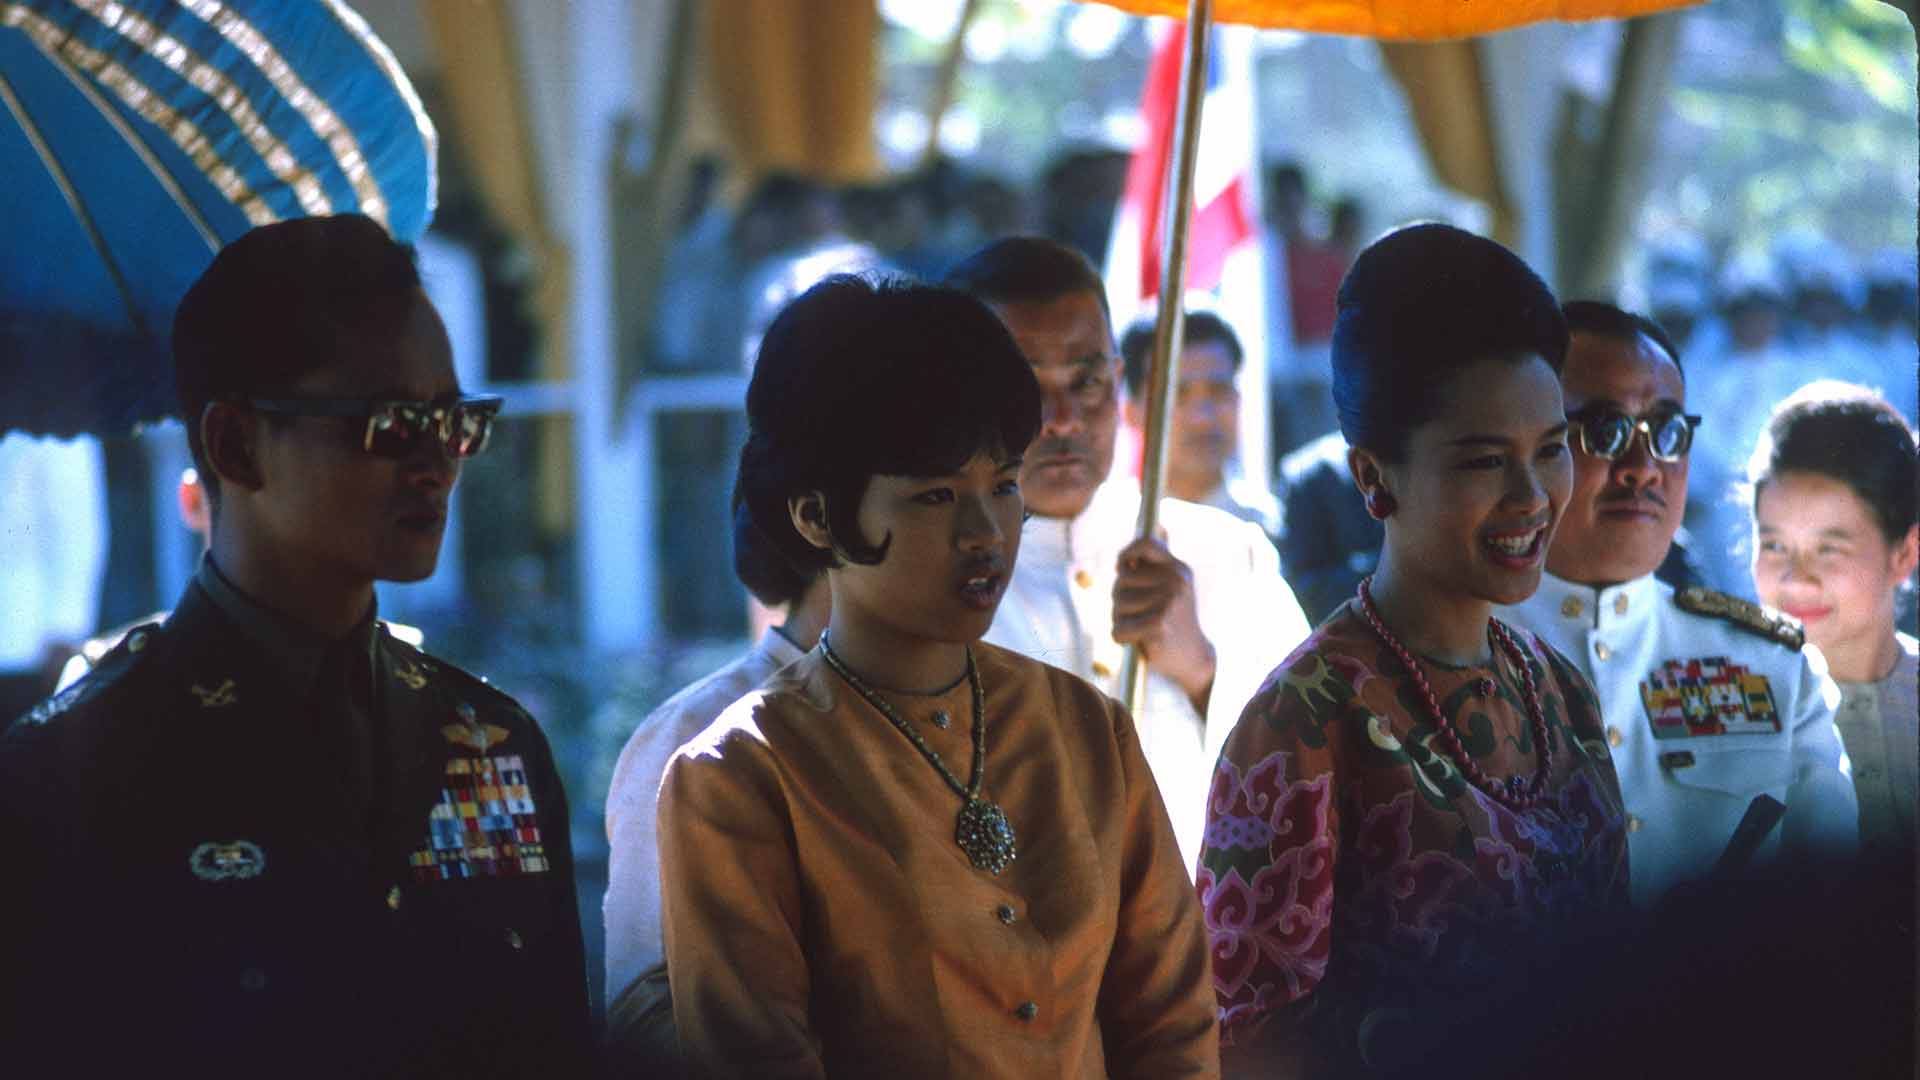 Same two women, smiling, escorted by two military personnel